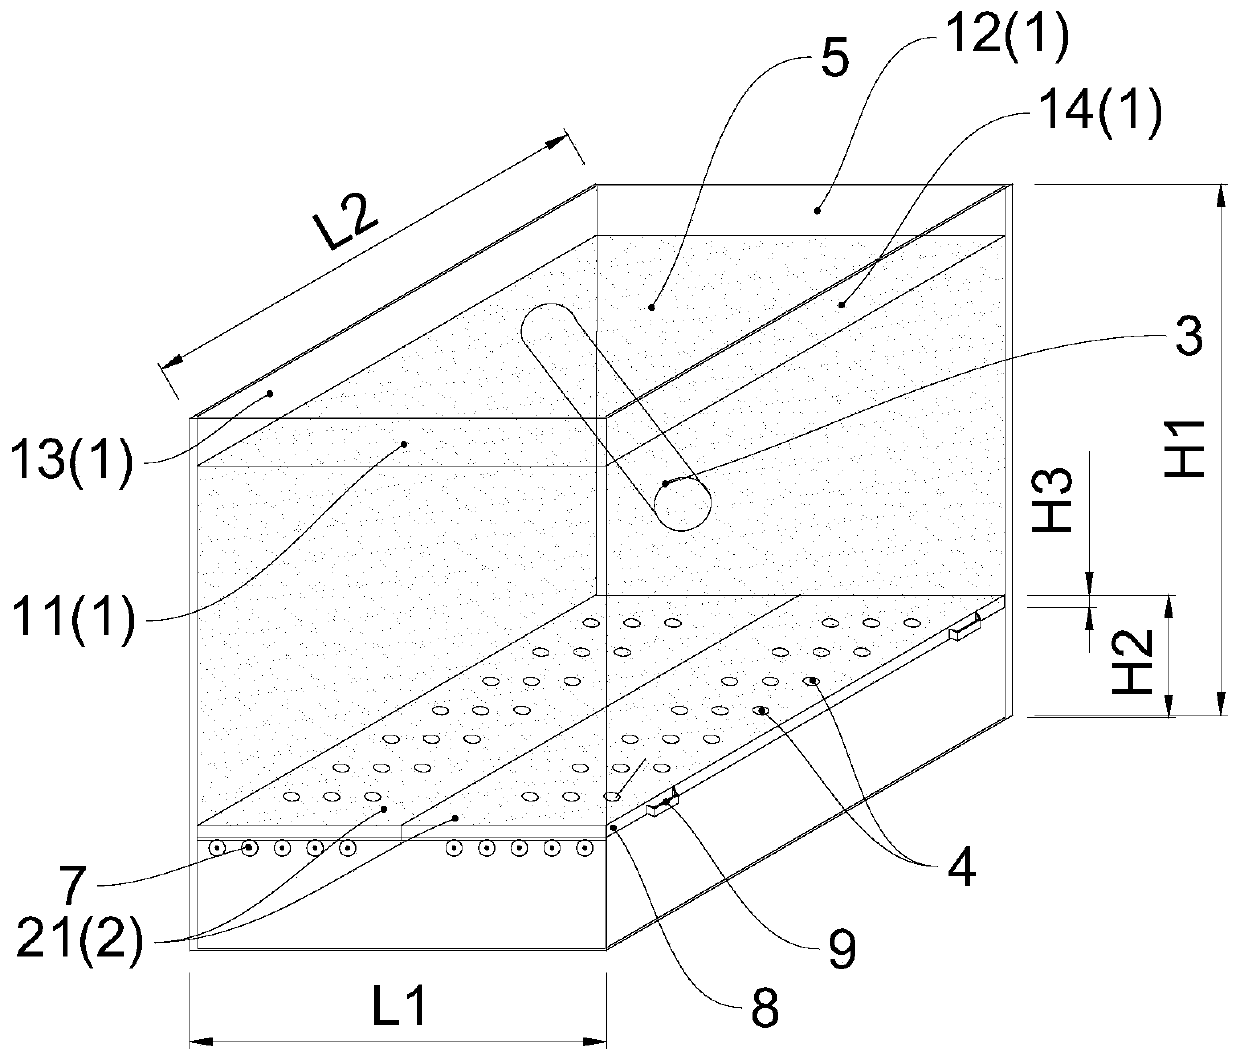 Movable door device for measuring soil arching effect of overlapped tunnel and test method